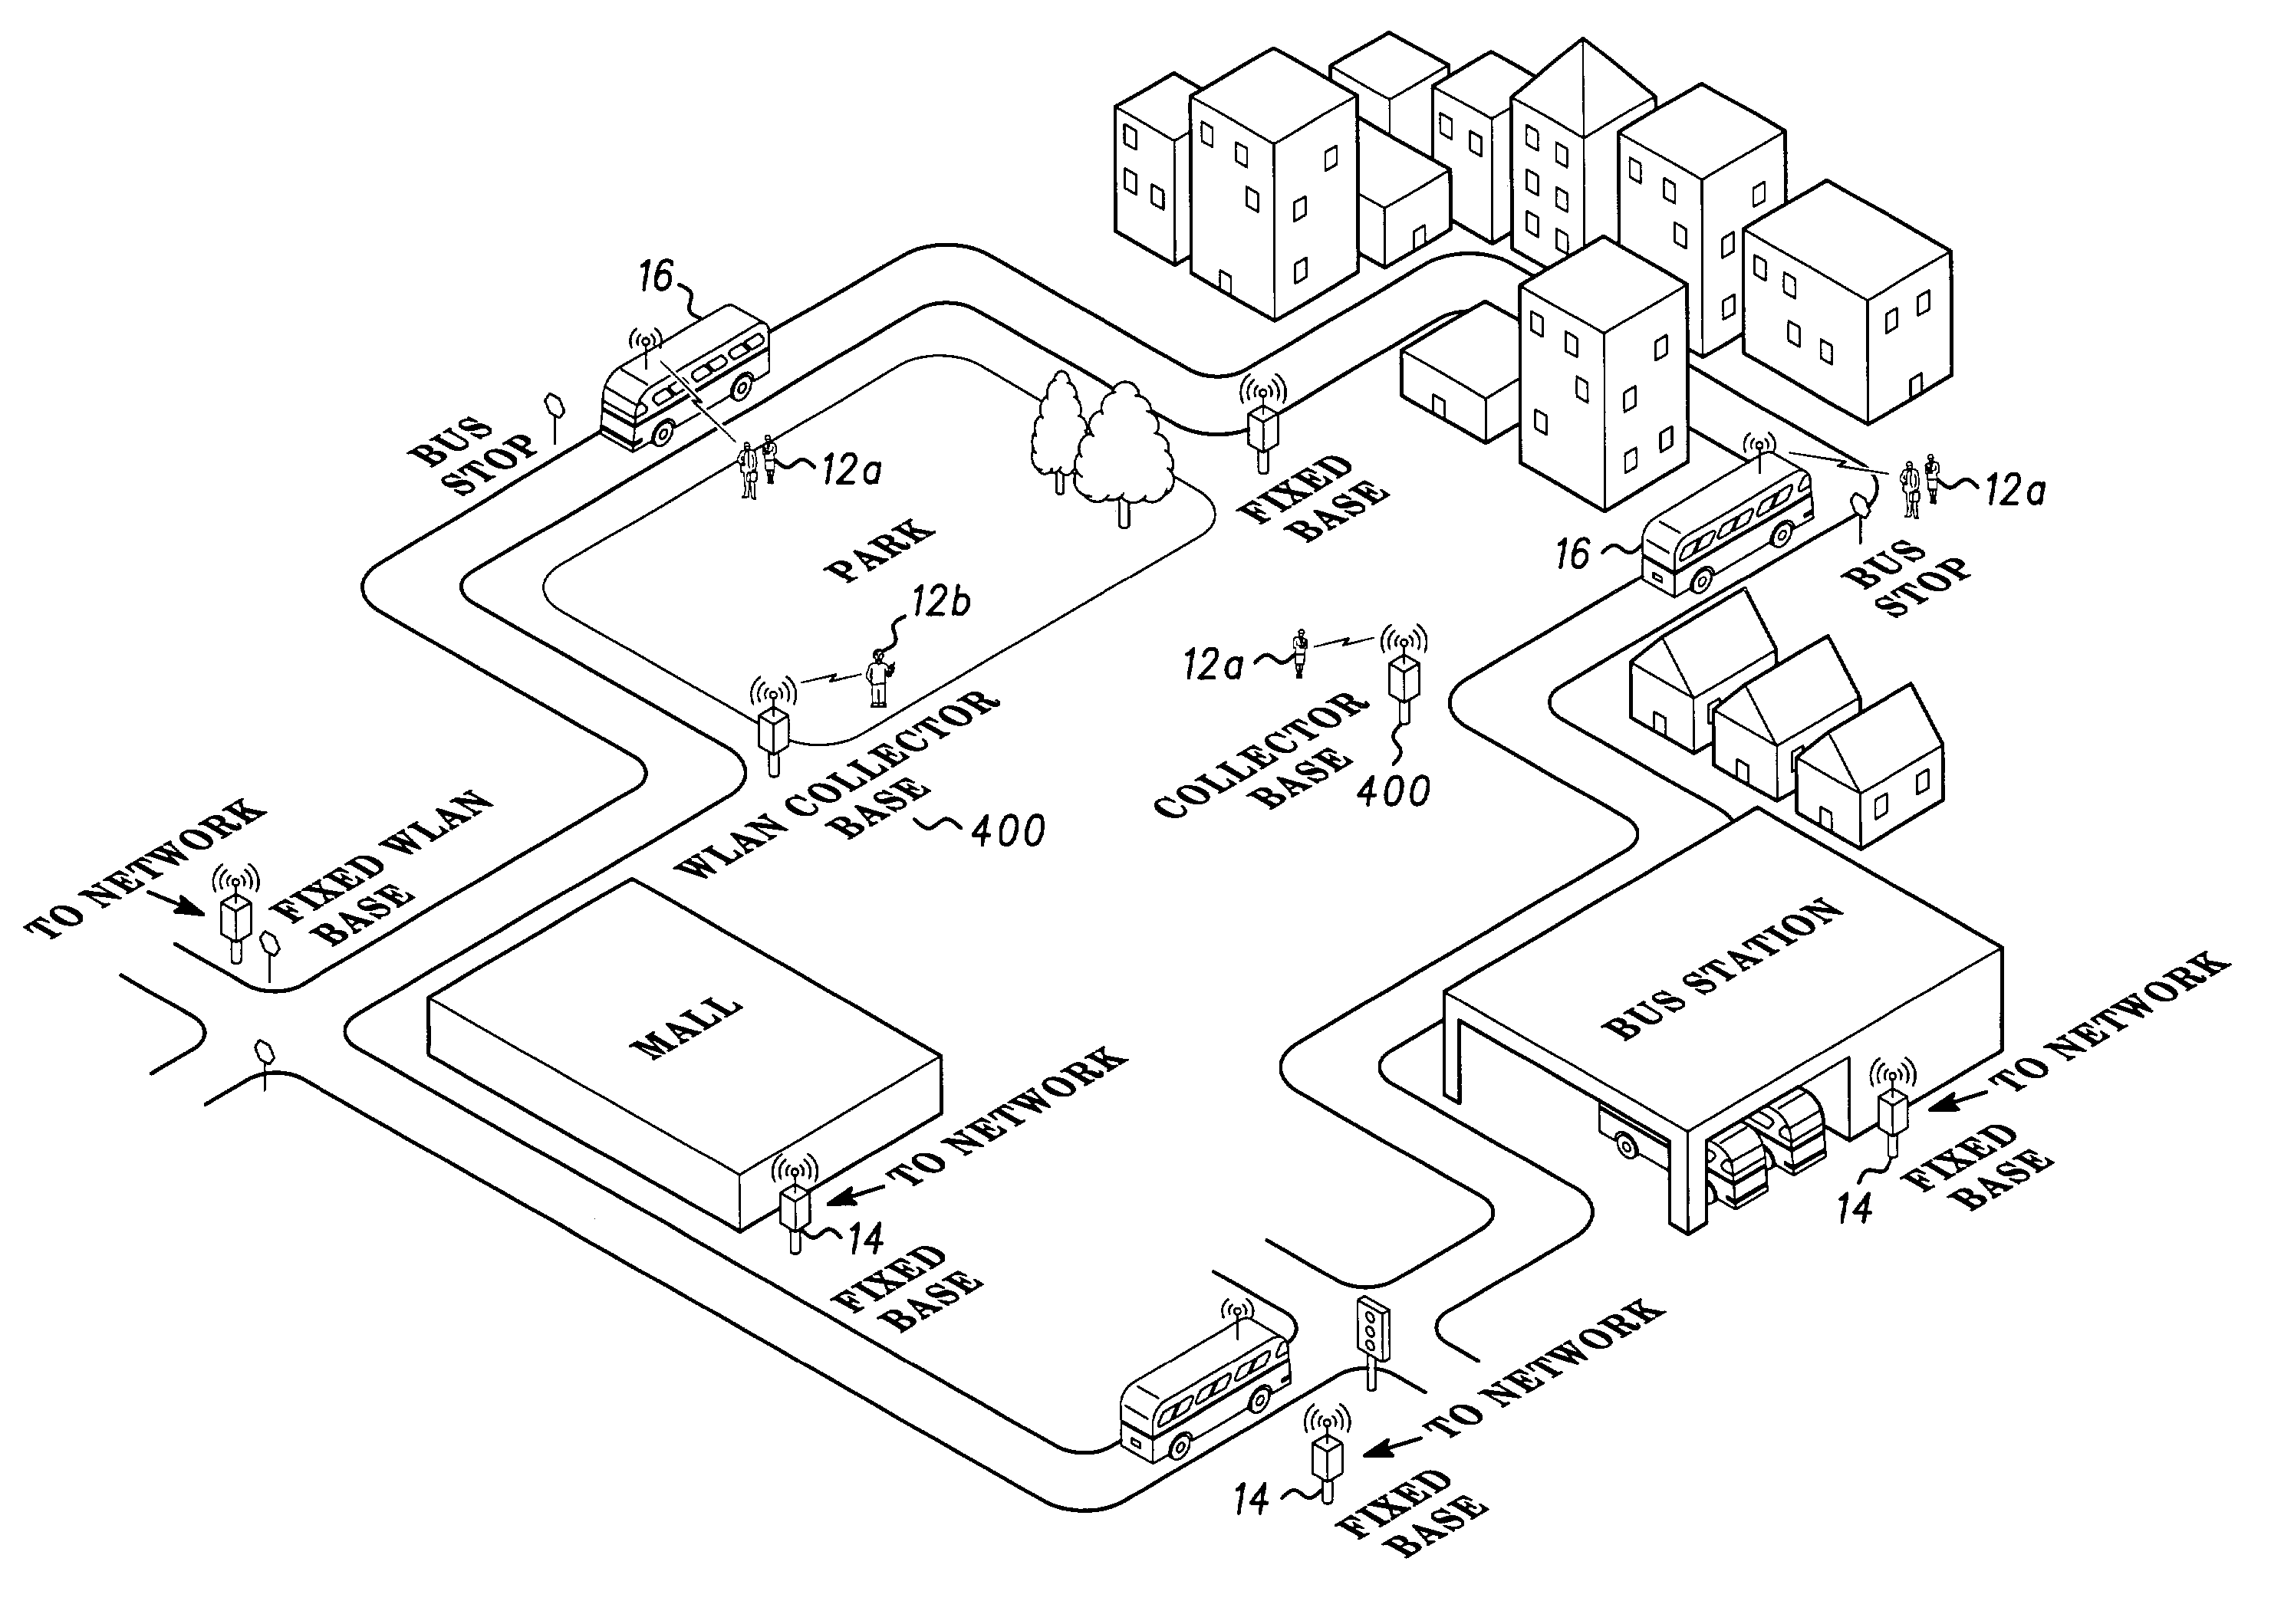 WLAN communication system and method with mobile base station